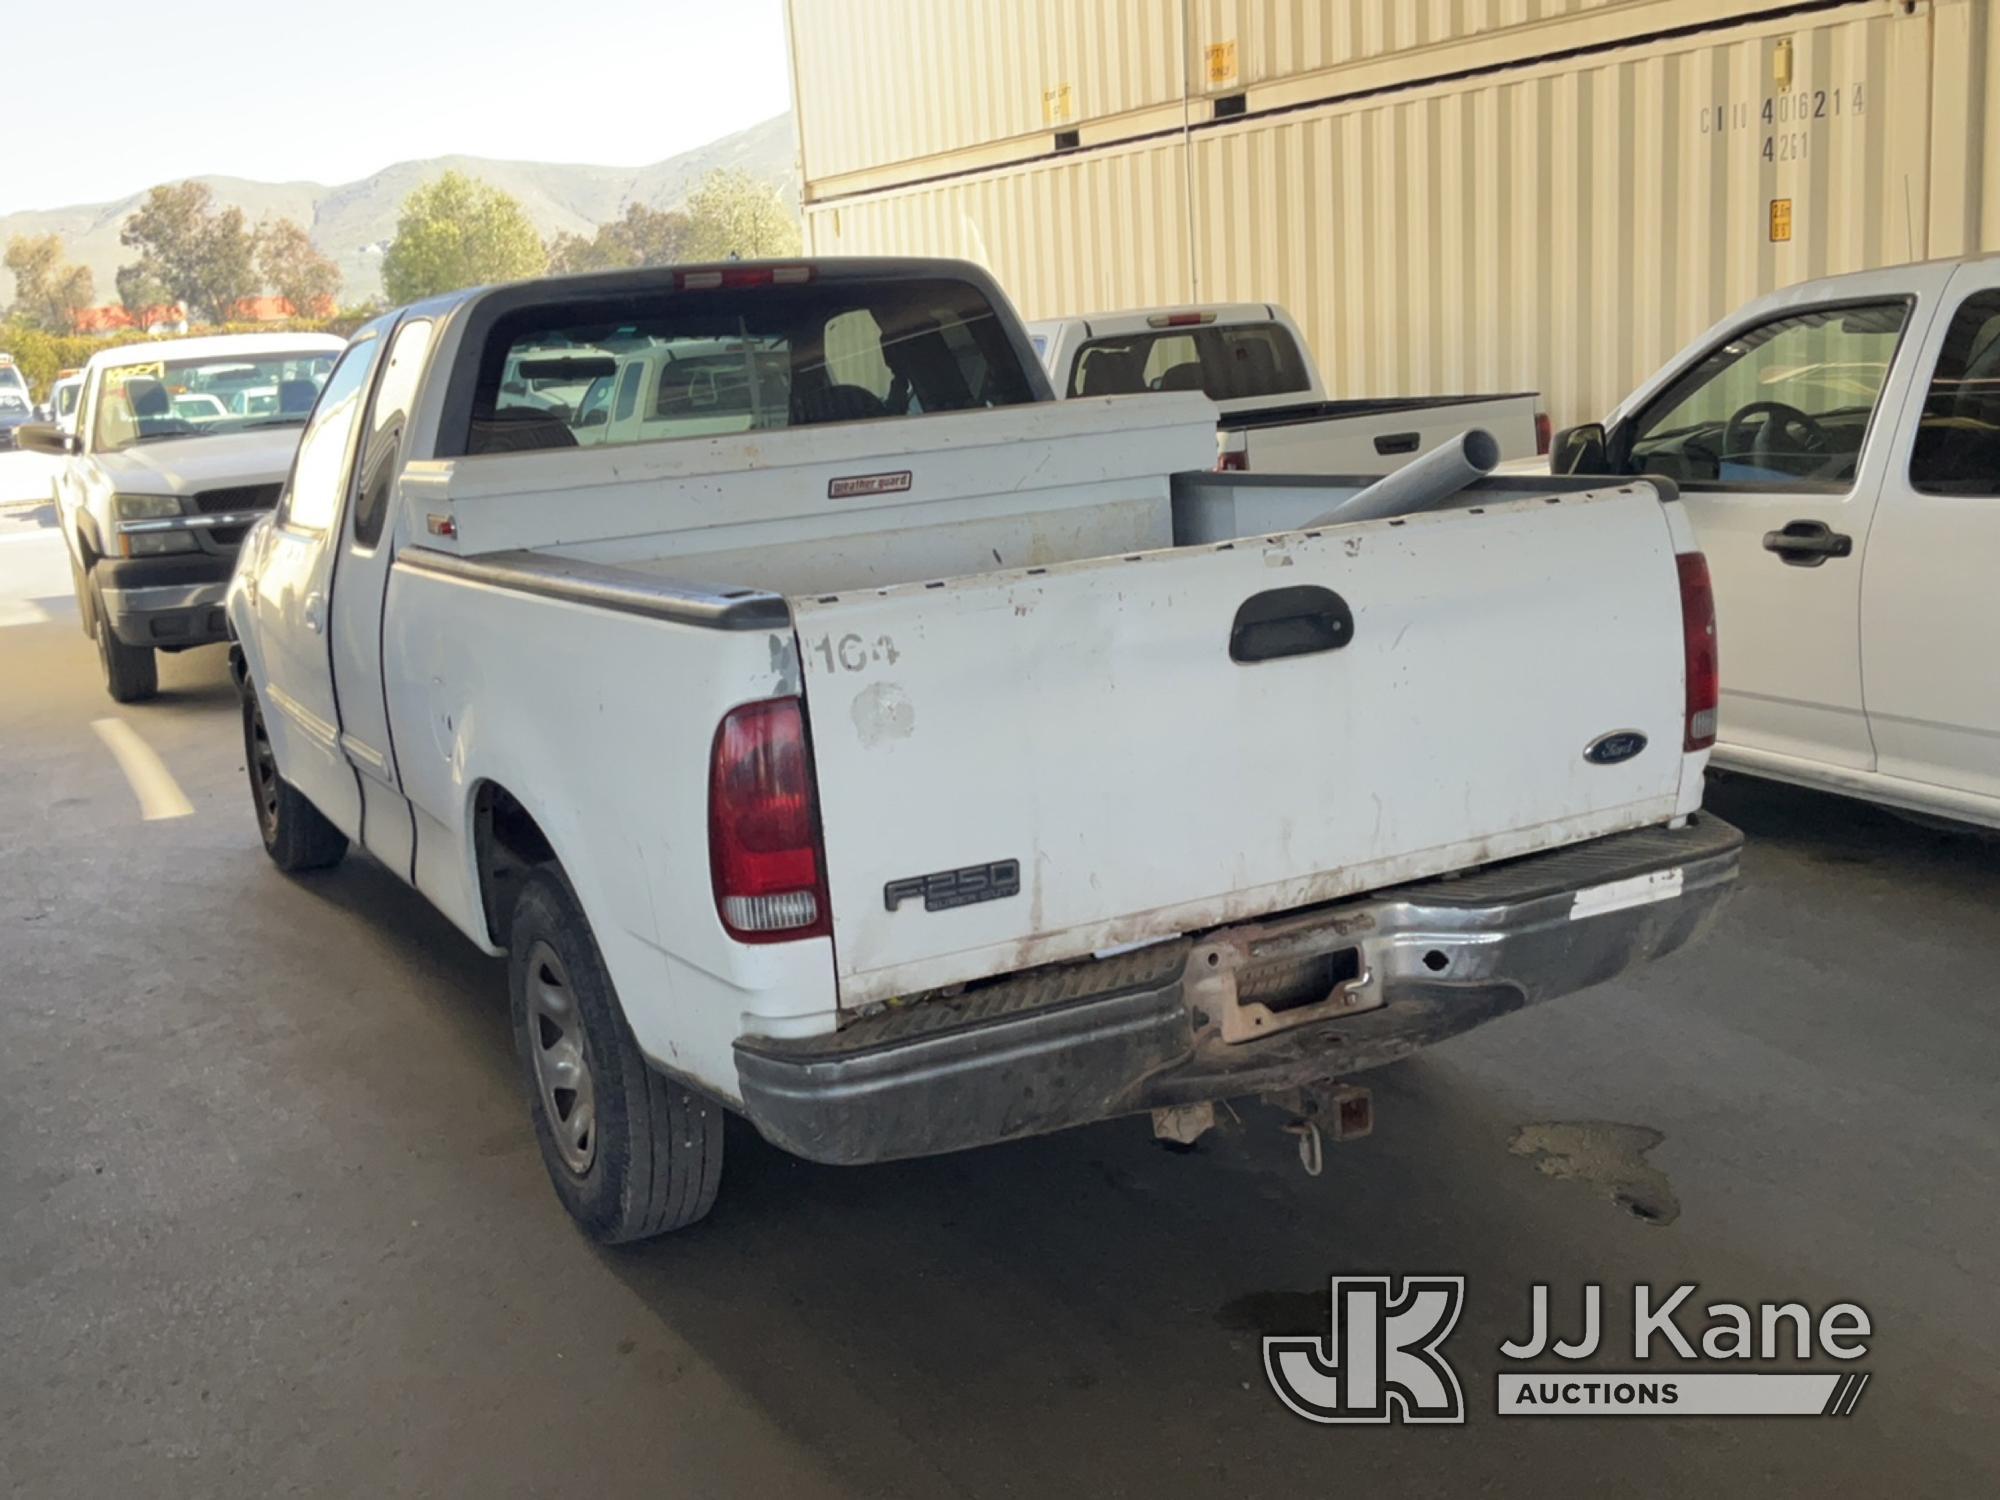 (Jurupa Valley, CA) 2000 Ford F-150 Extended-Cab Pickup Truck Runs & Moves, Check Engine Light Is On